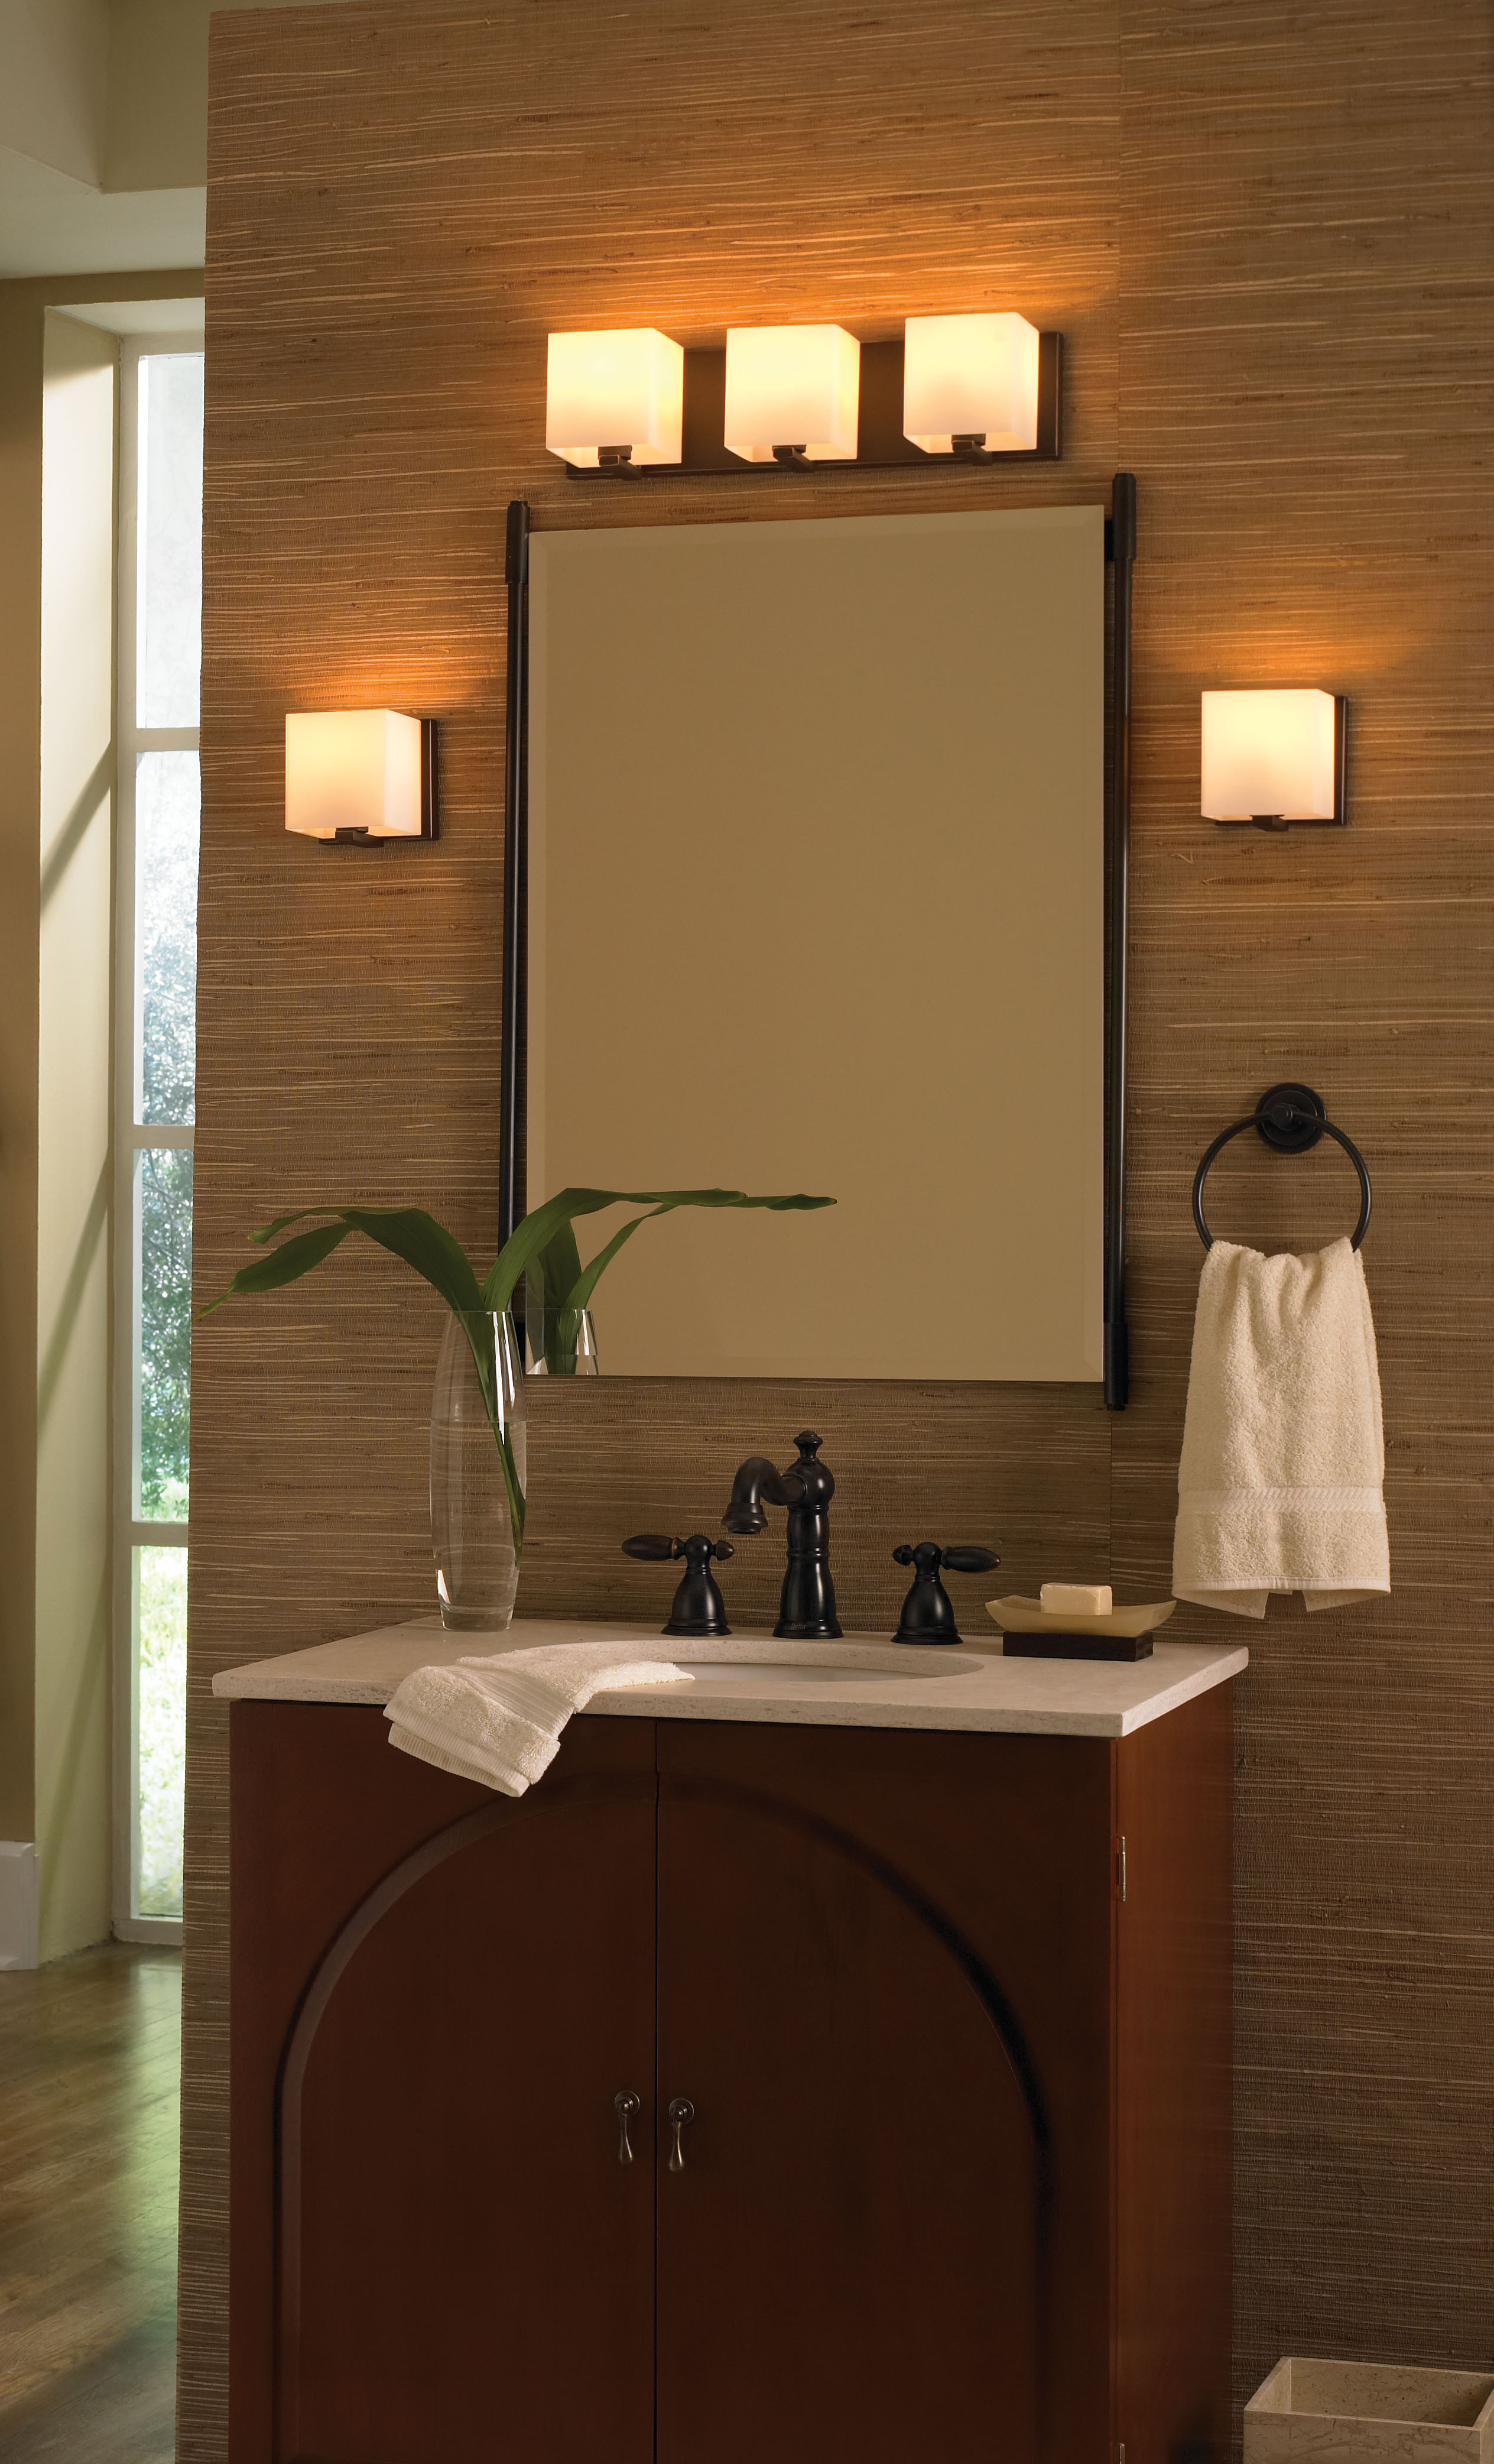 Highlights Favorites for Modern Bath Lighting in the New Year